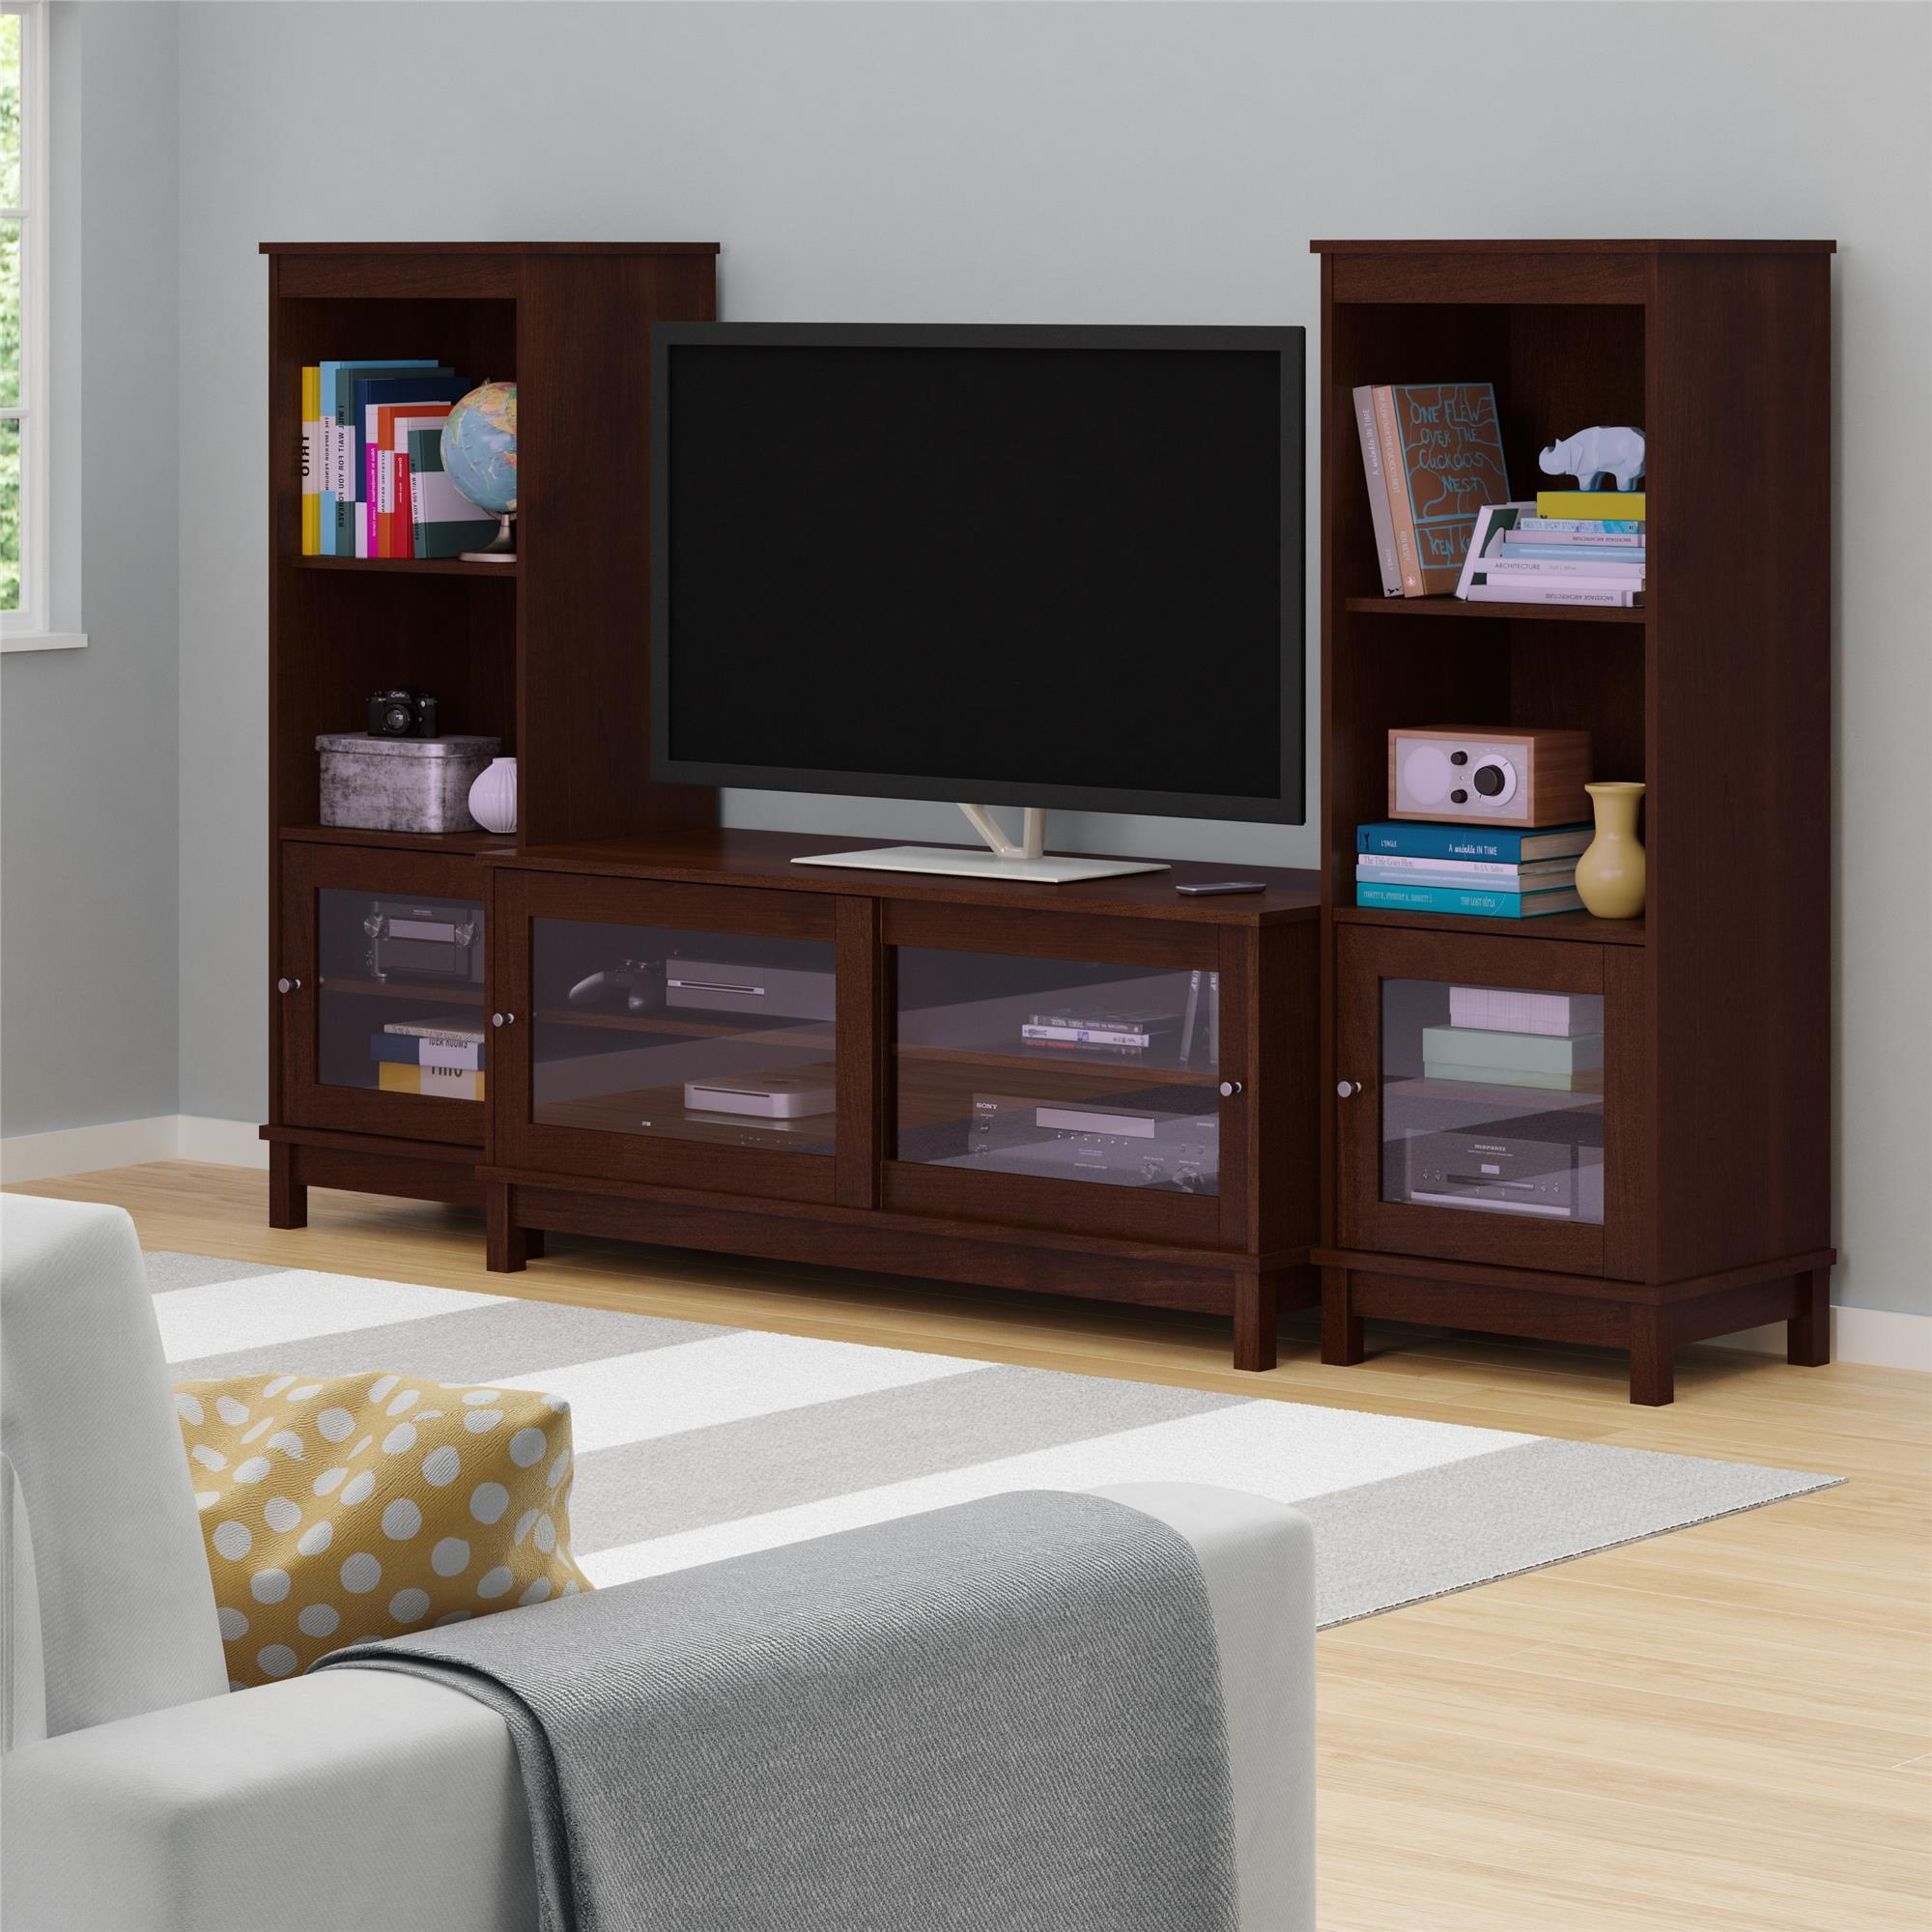 Mainstays TV Stand for TVs up to 55